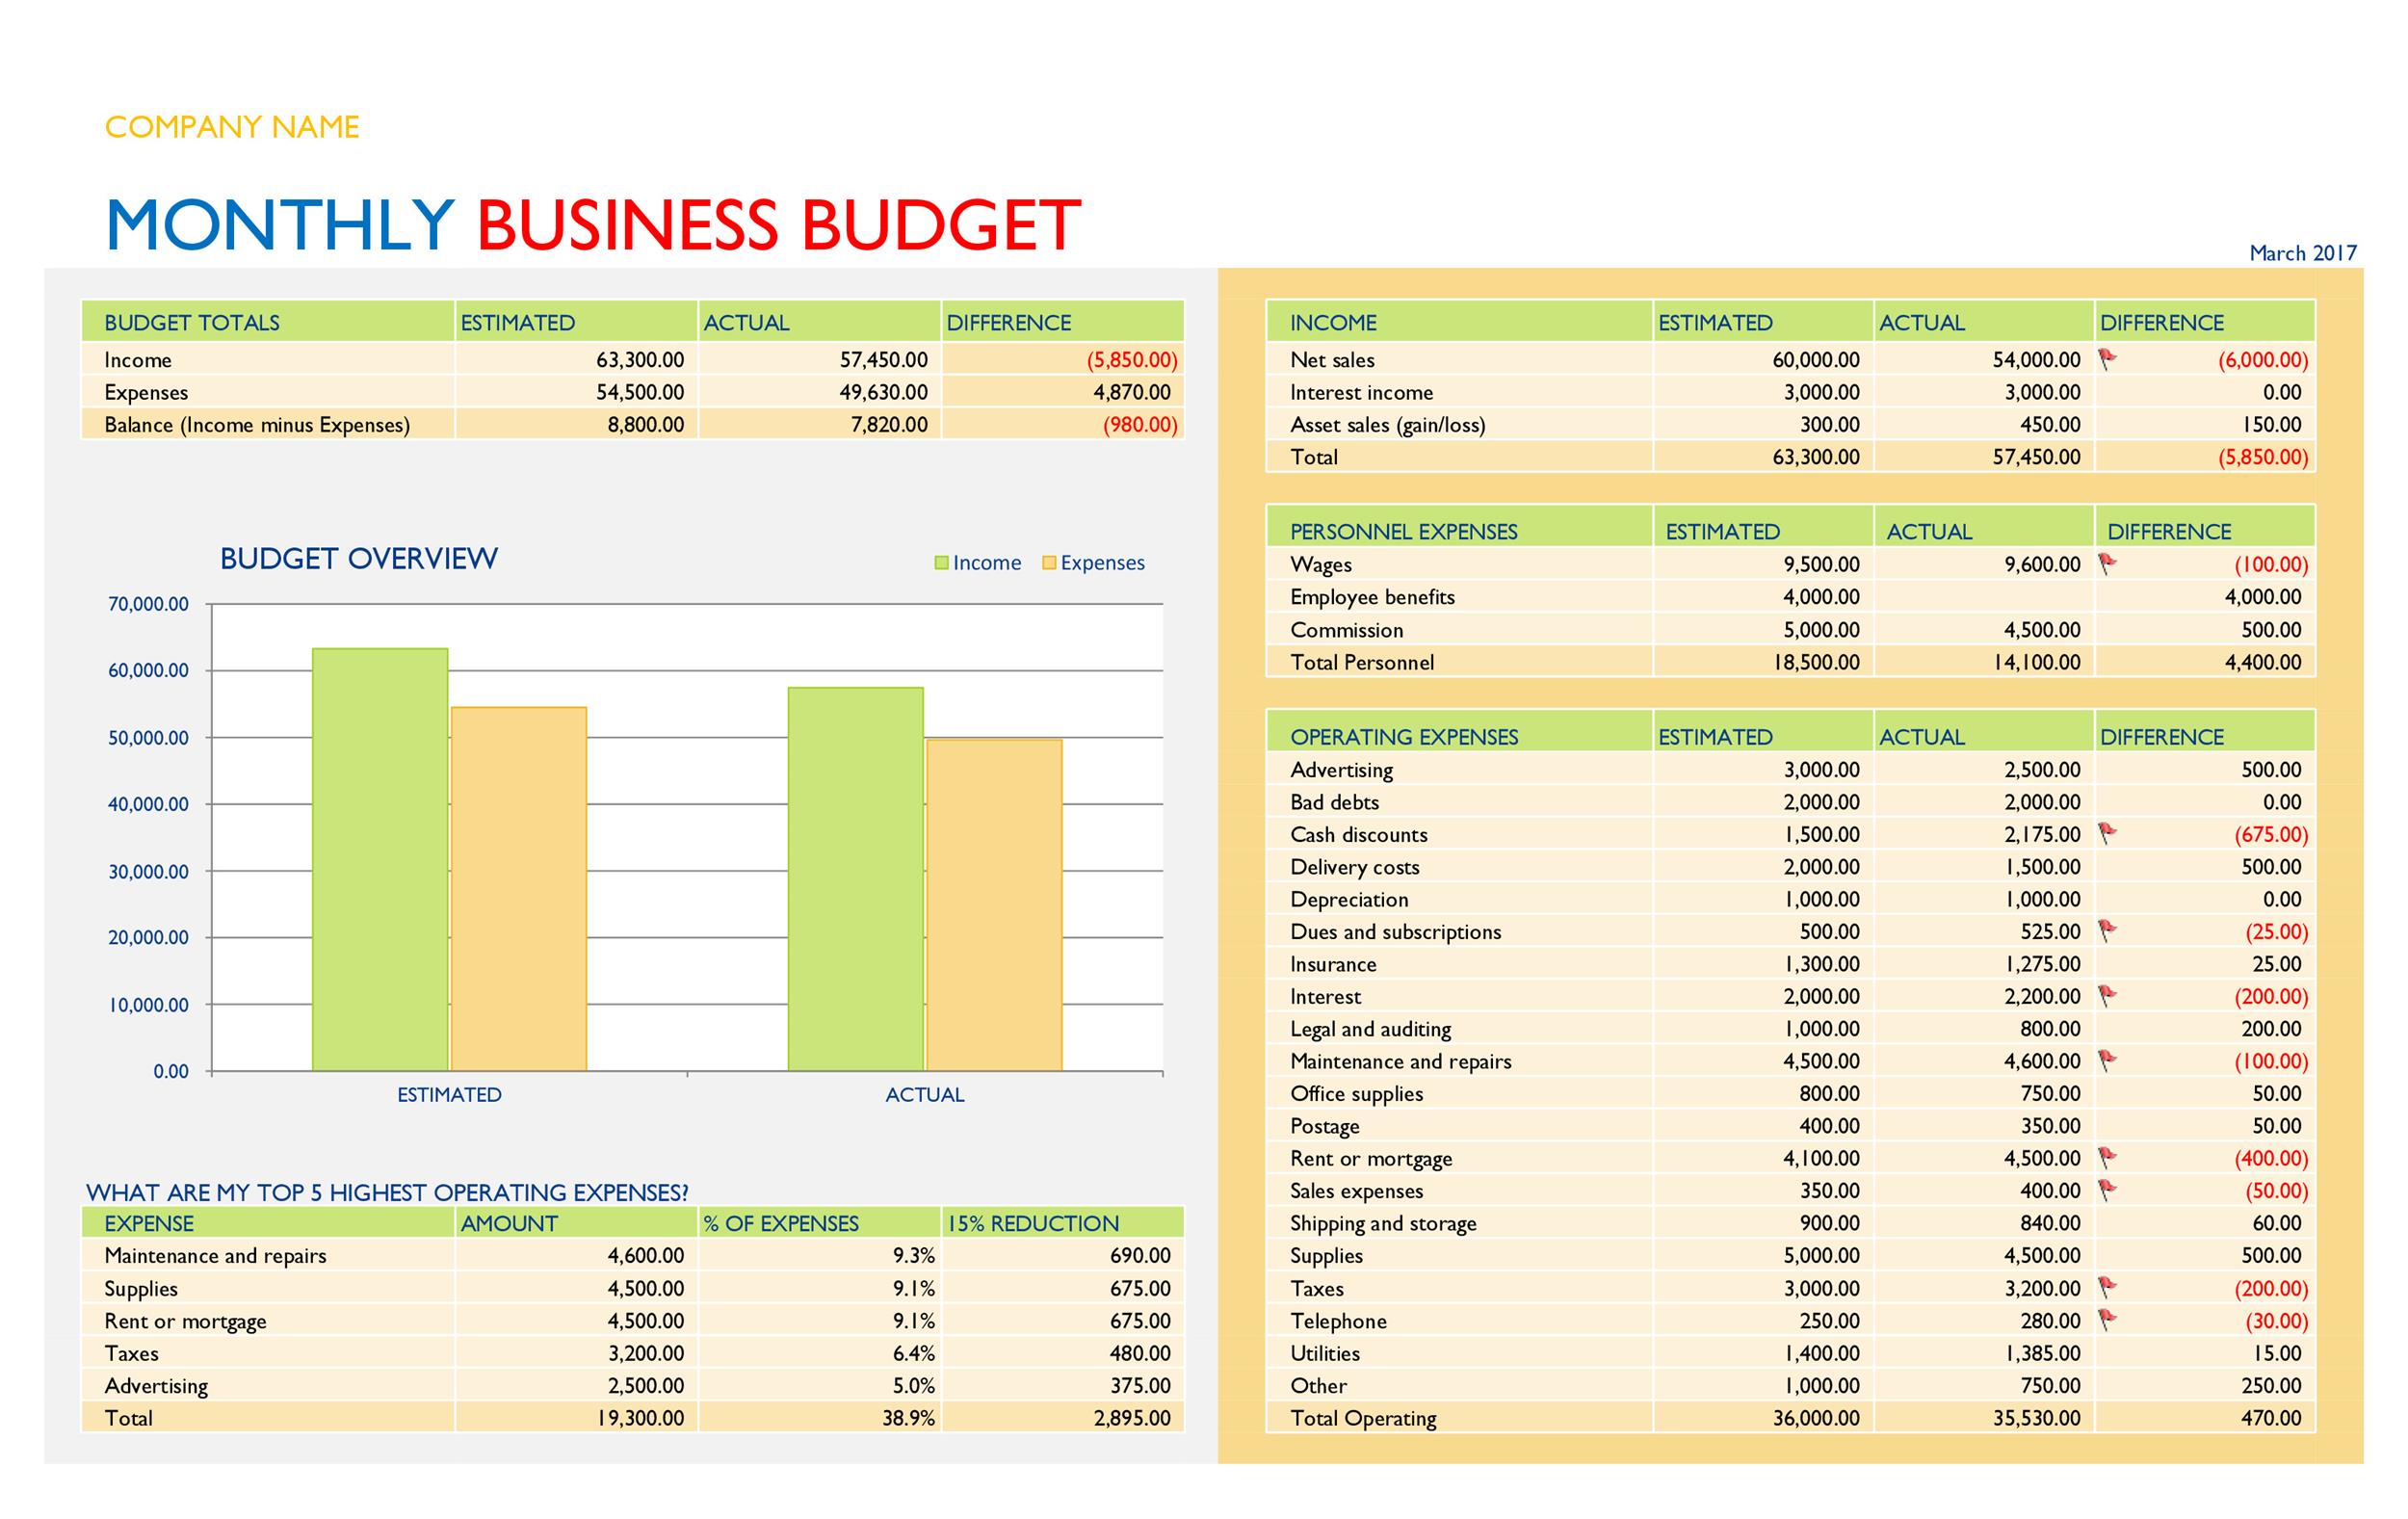 budget for small business 2022